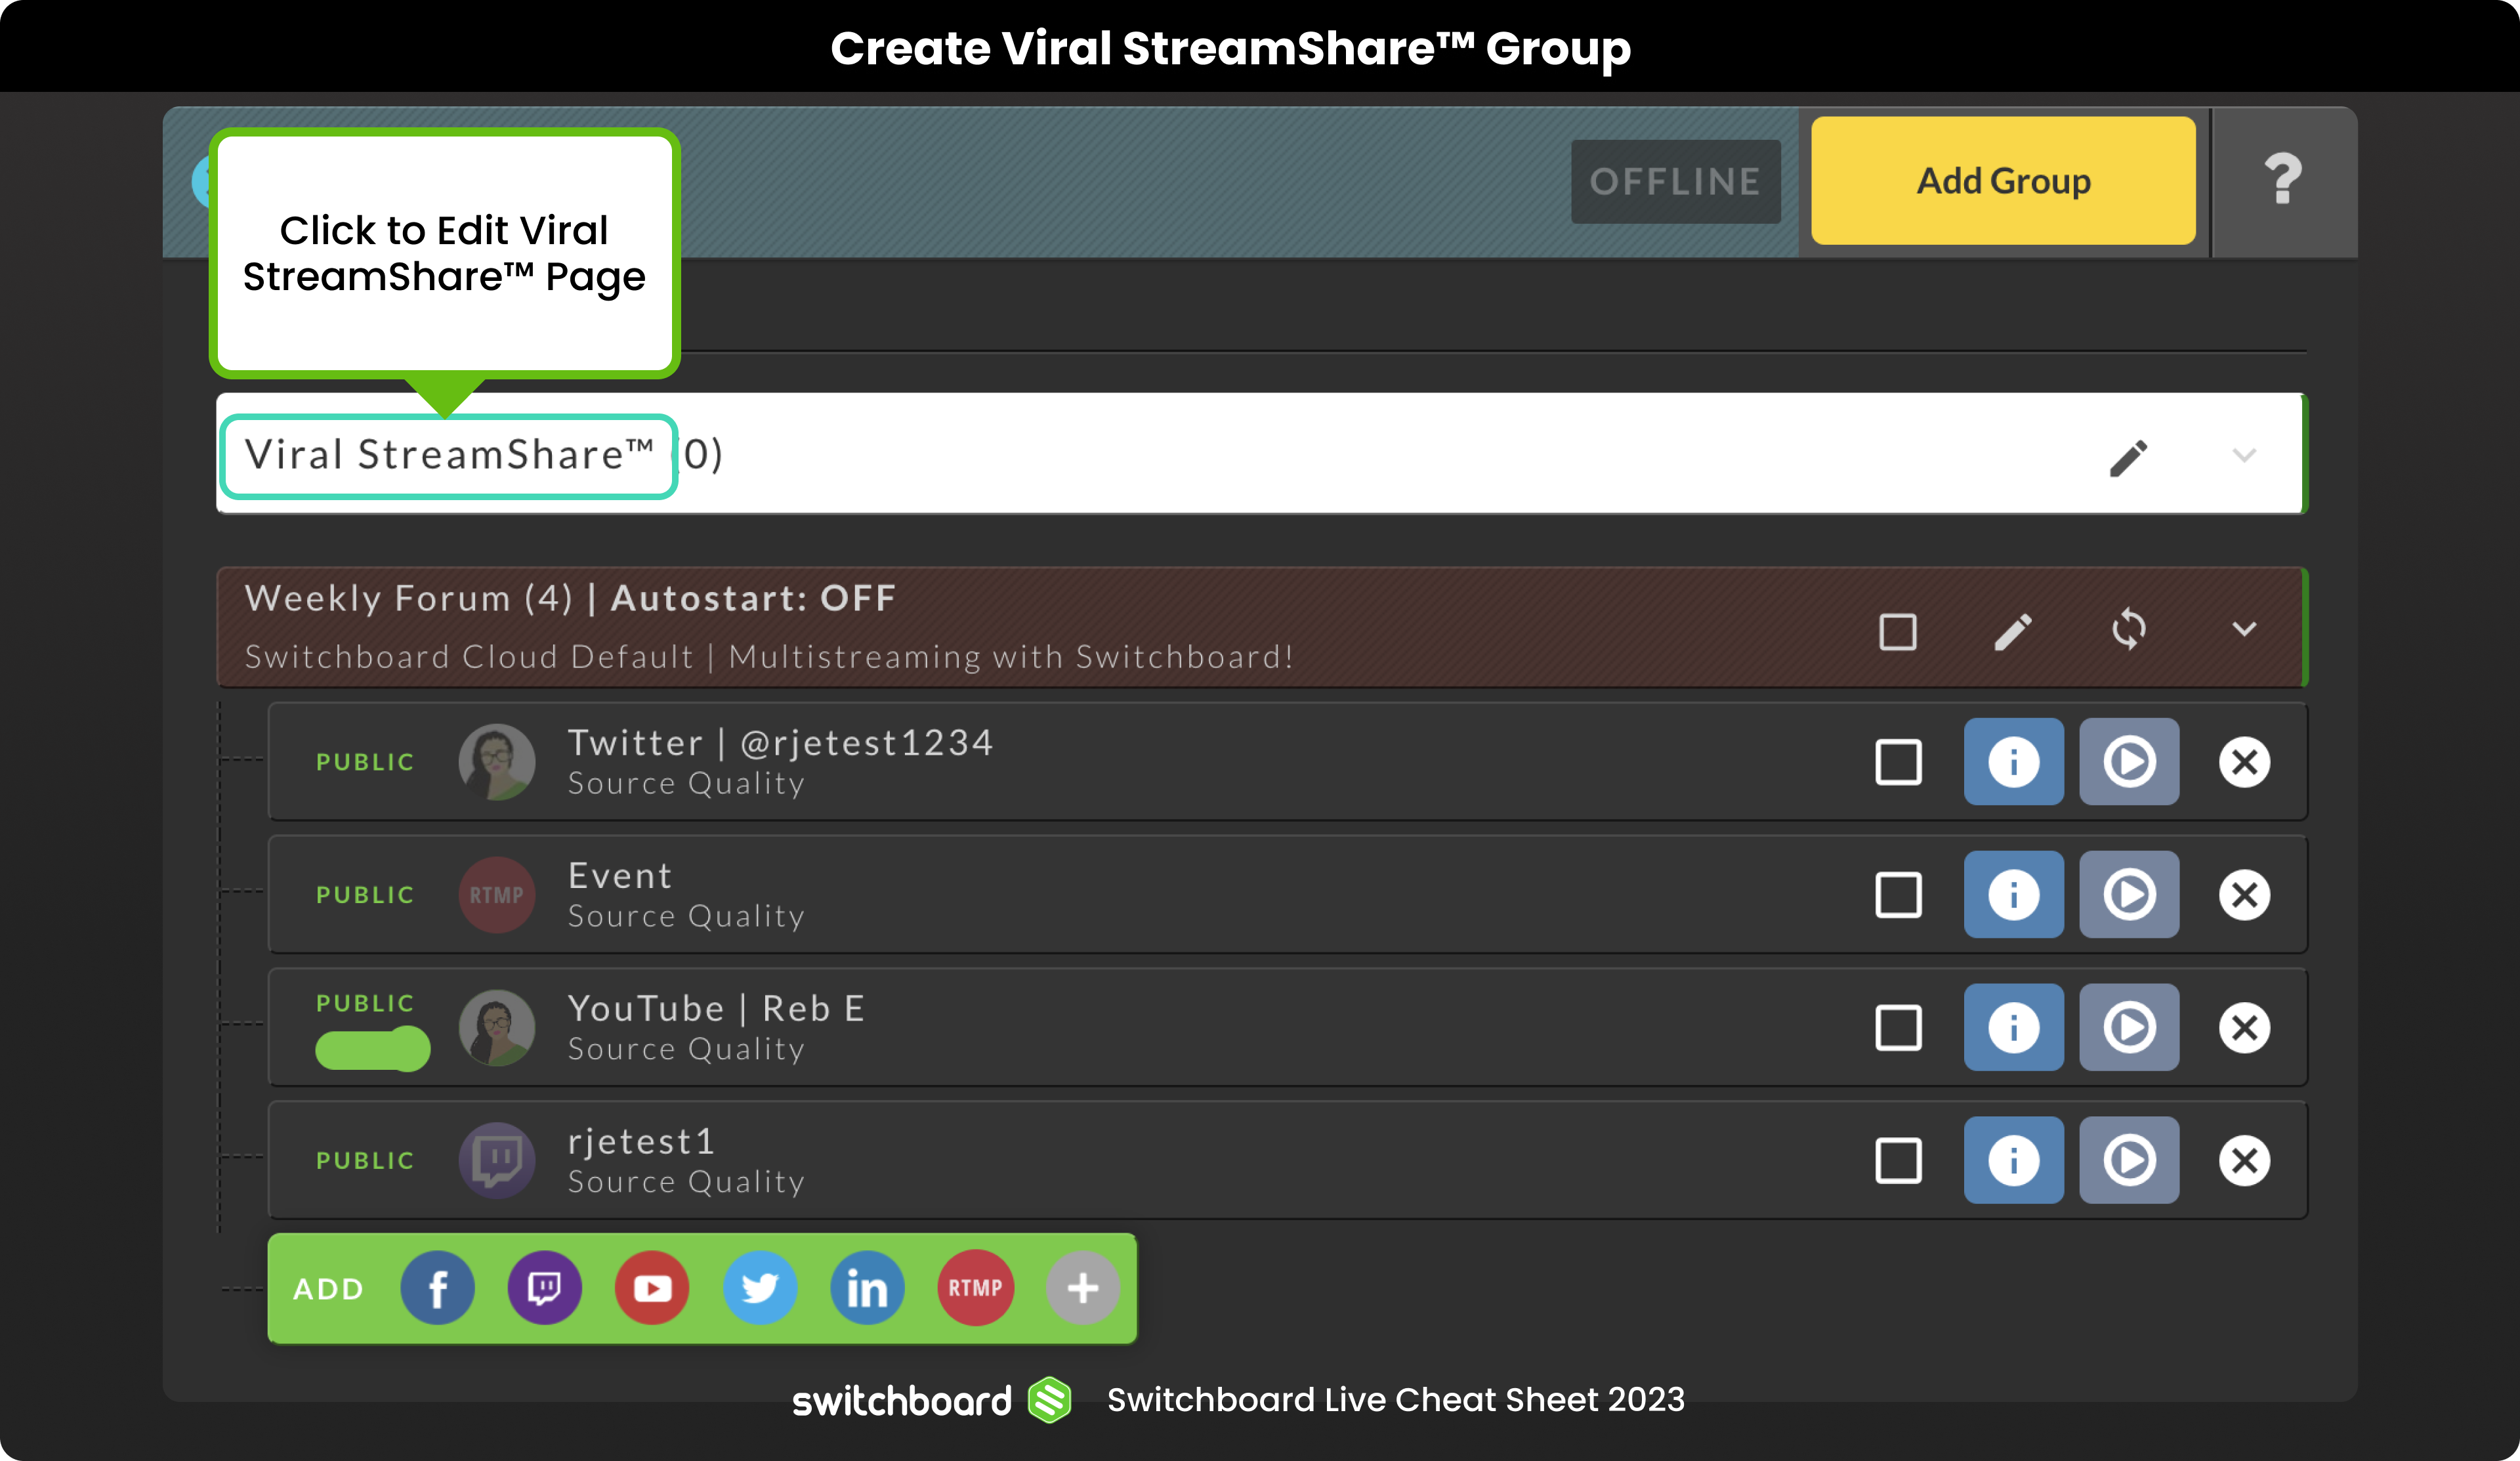 switchboard_live_open_Viral_StreamShare™_page-editor_group.png